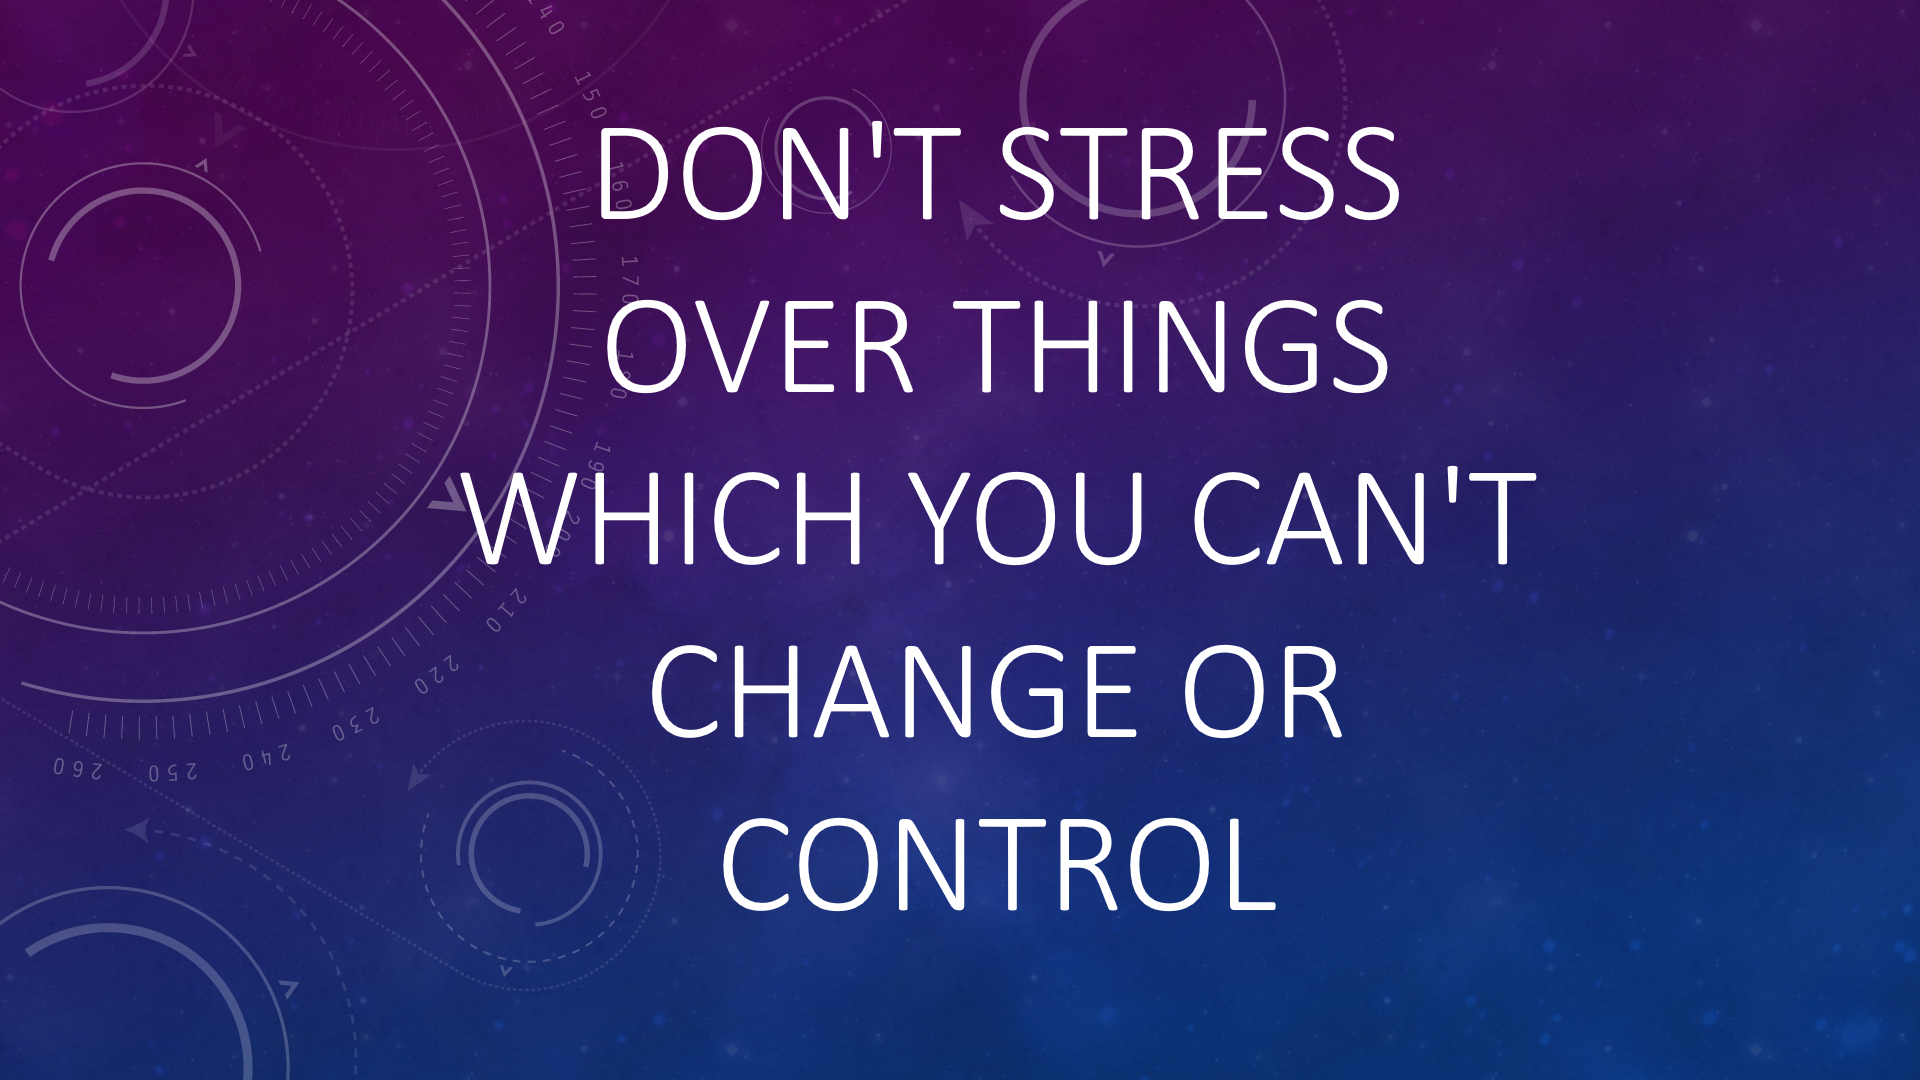 Don't stress over things which you can't change or control